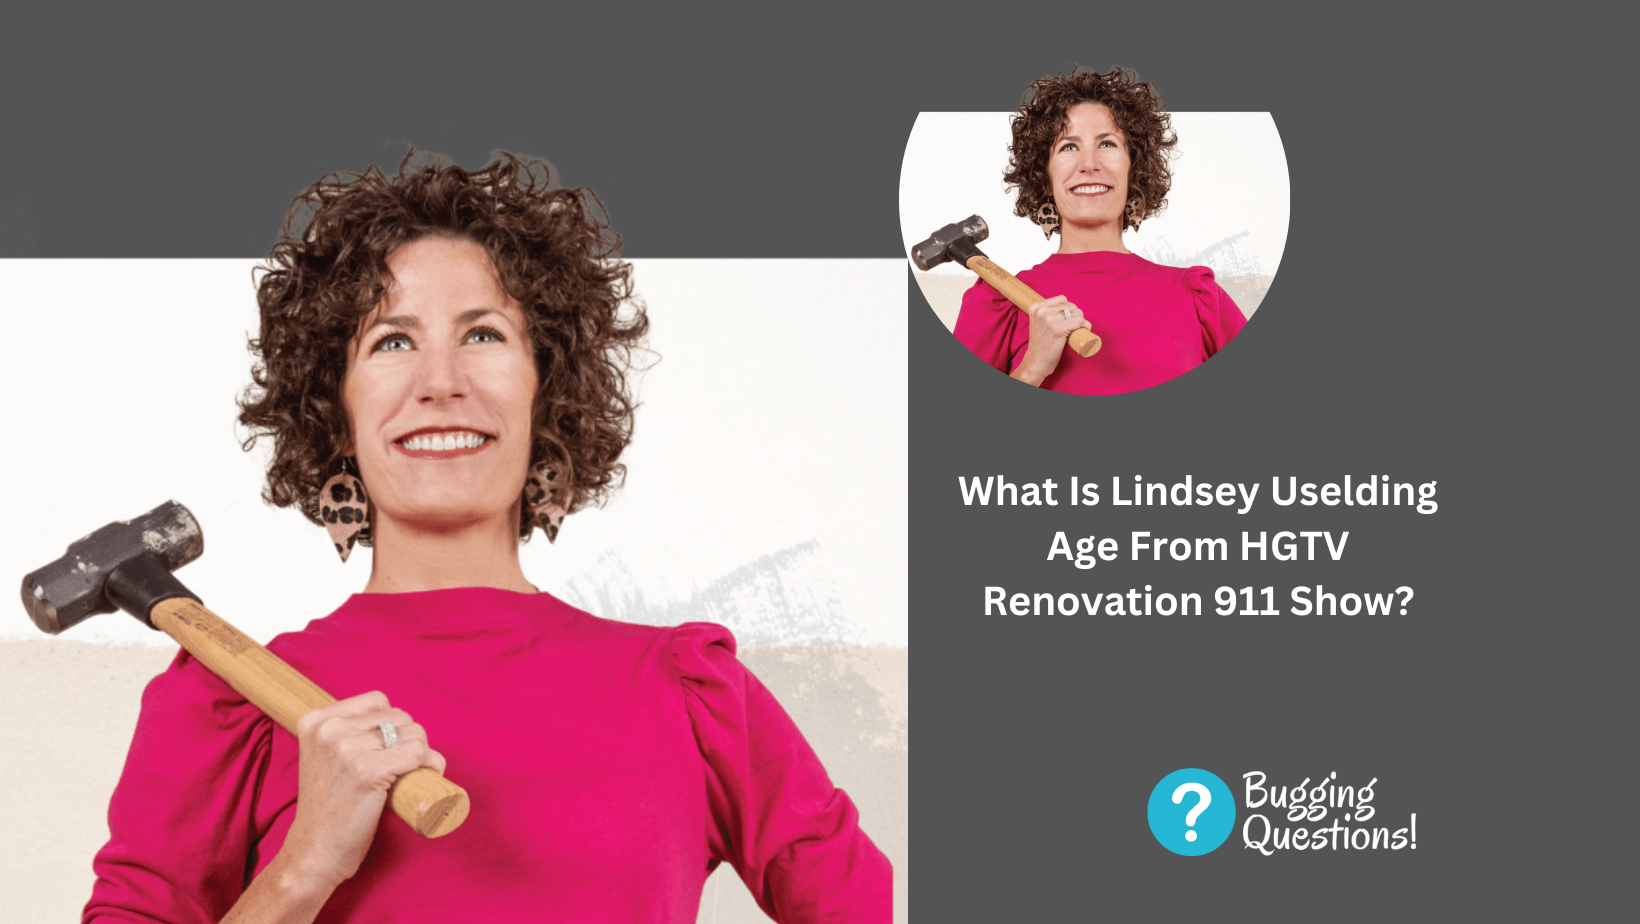 What Is Lindsey Uselding Age From HGTV Renovation 911 Show?